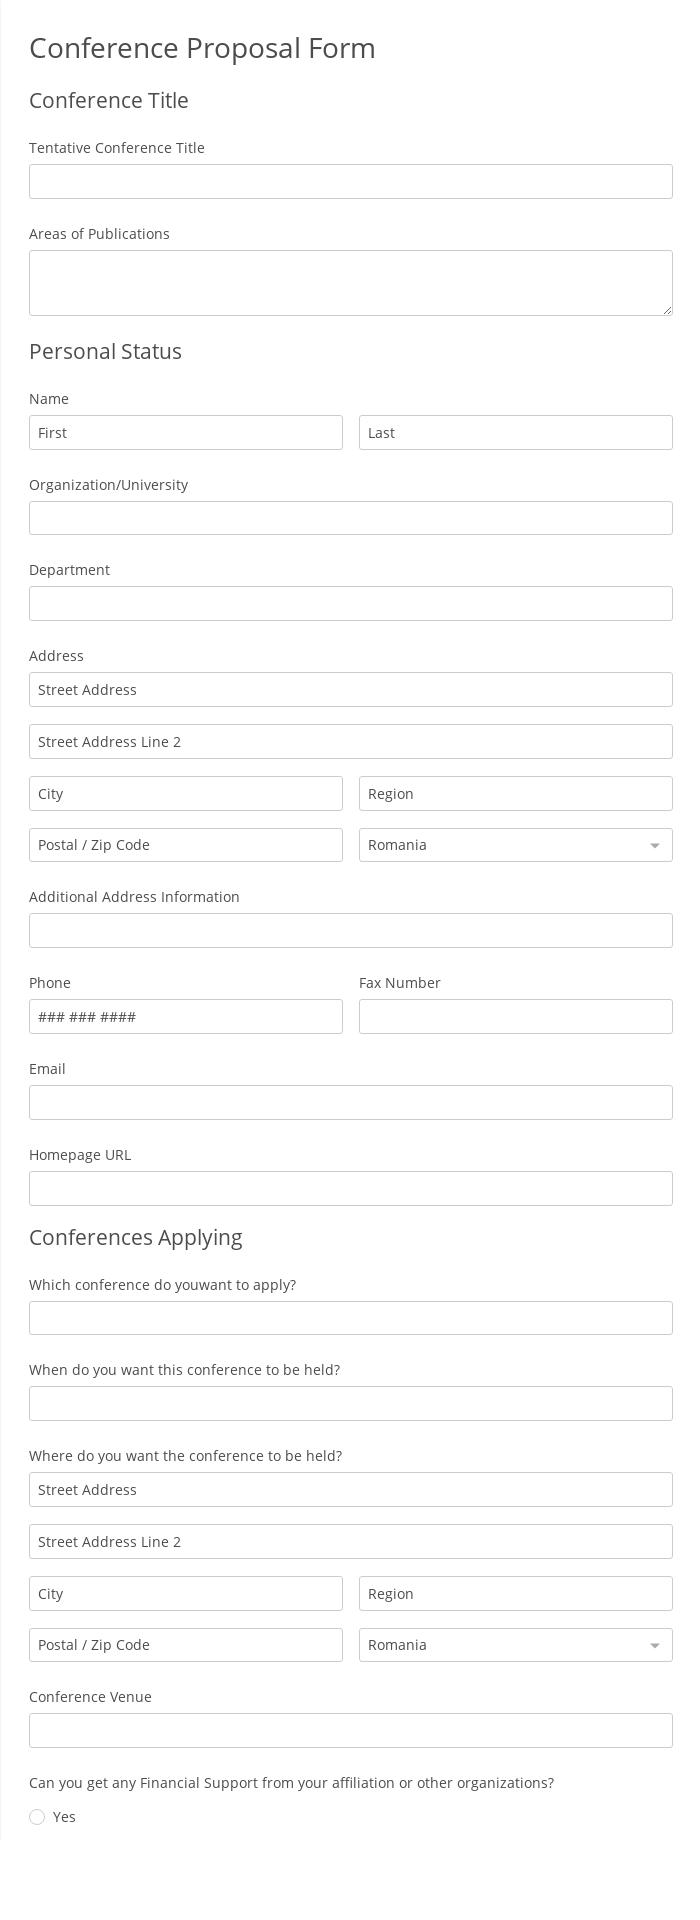 Conference Proposal Form